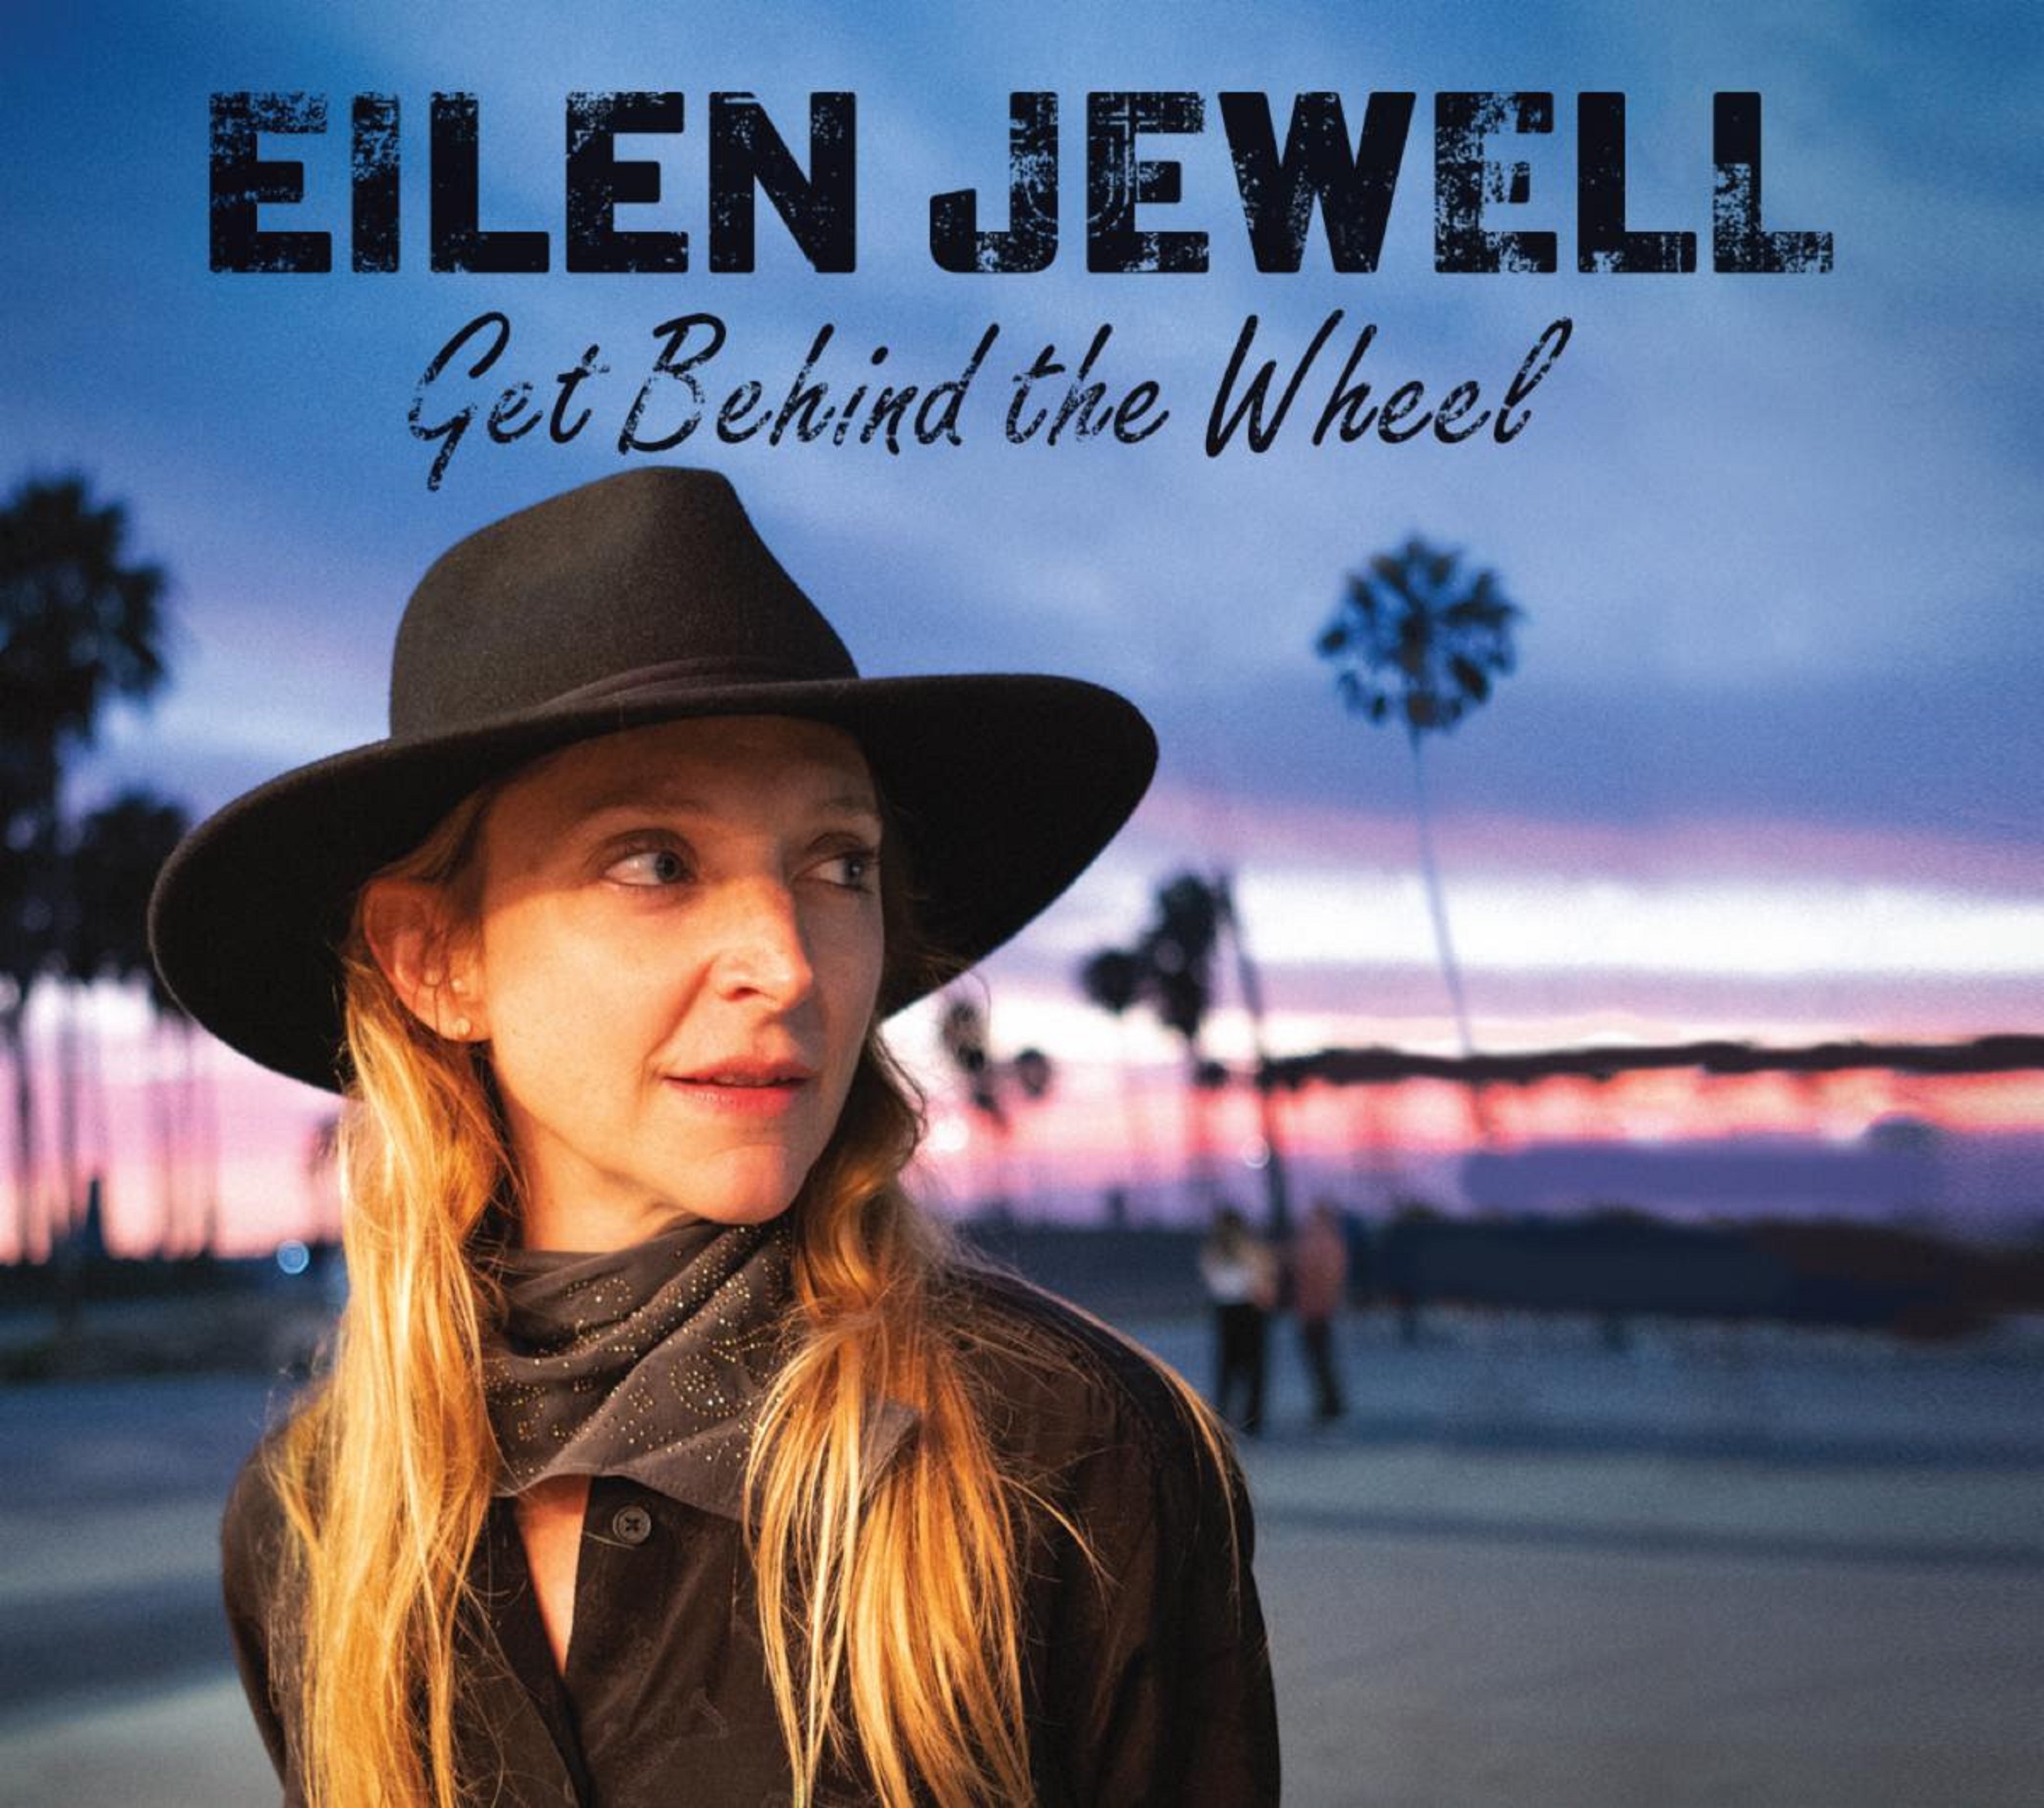 Eilen Jewell Shares Her Journey To Purpose And Meaning On Expansive New Album Get Behind The Wheel